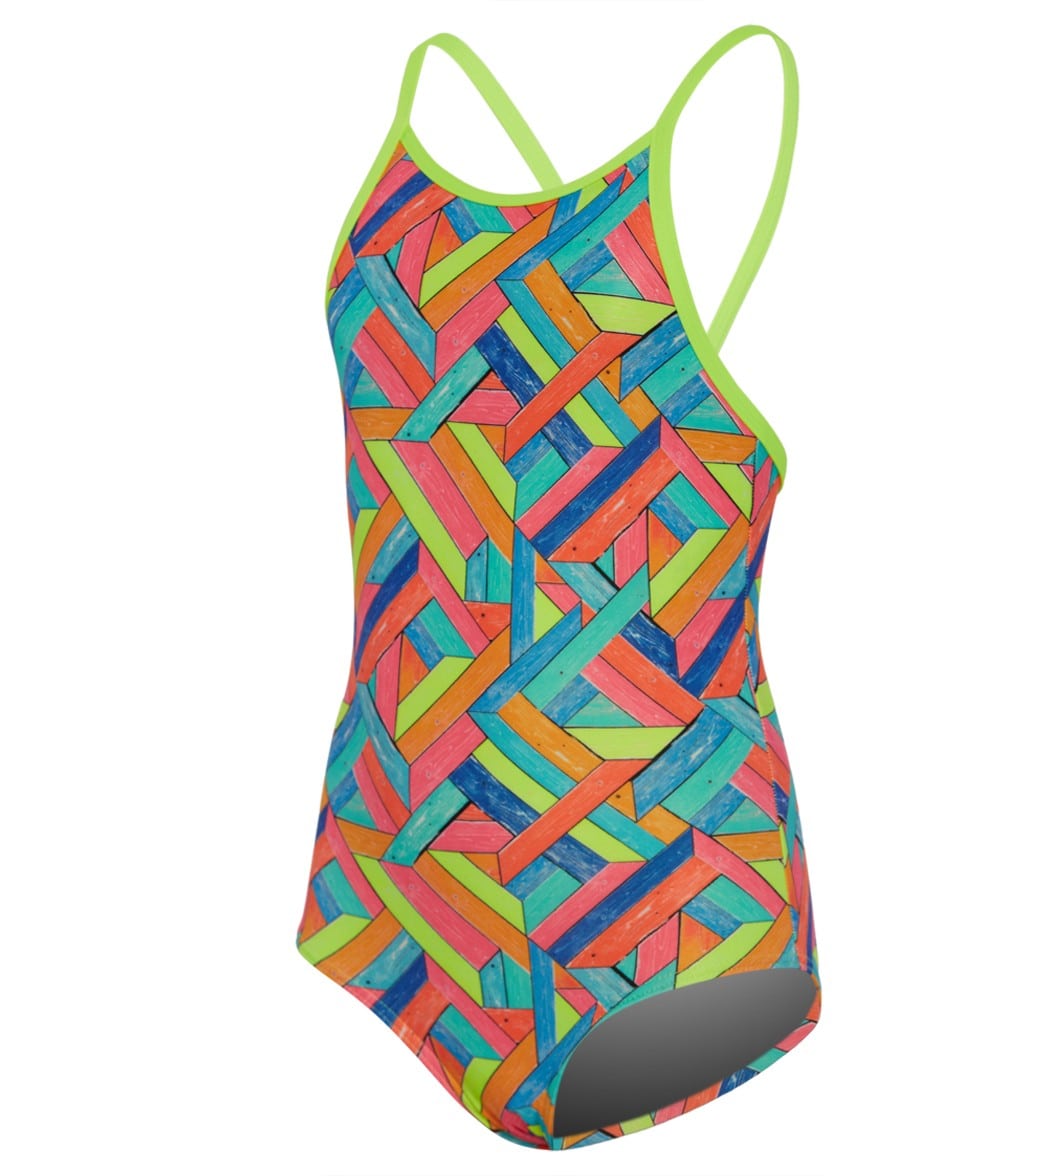 Funkita Toddler Girls' Panel Pop Printed One Piece Swimsuit - Multi 1 Polyester - Swimoutlet.com